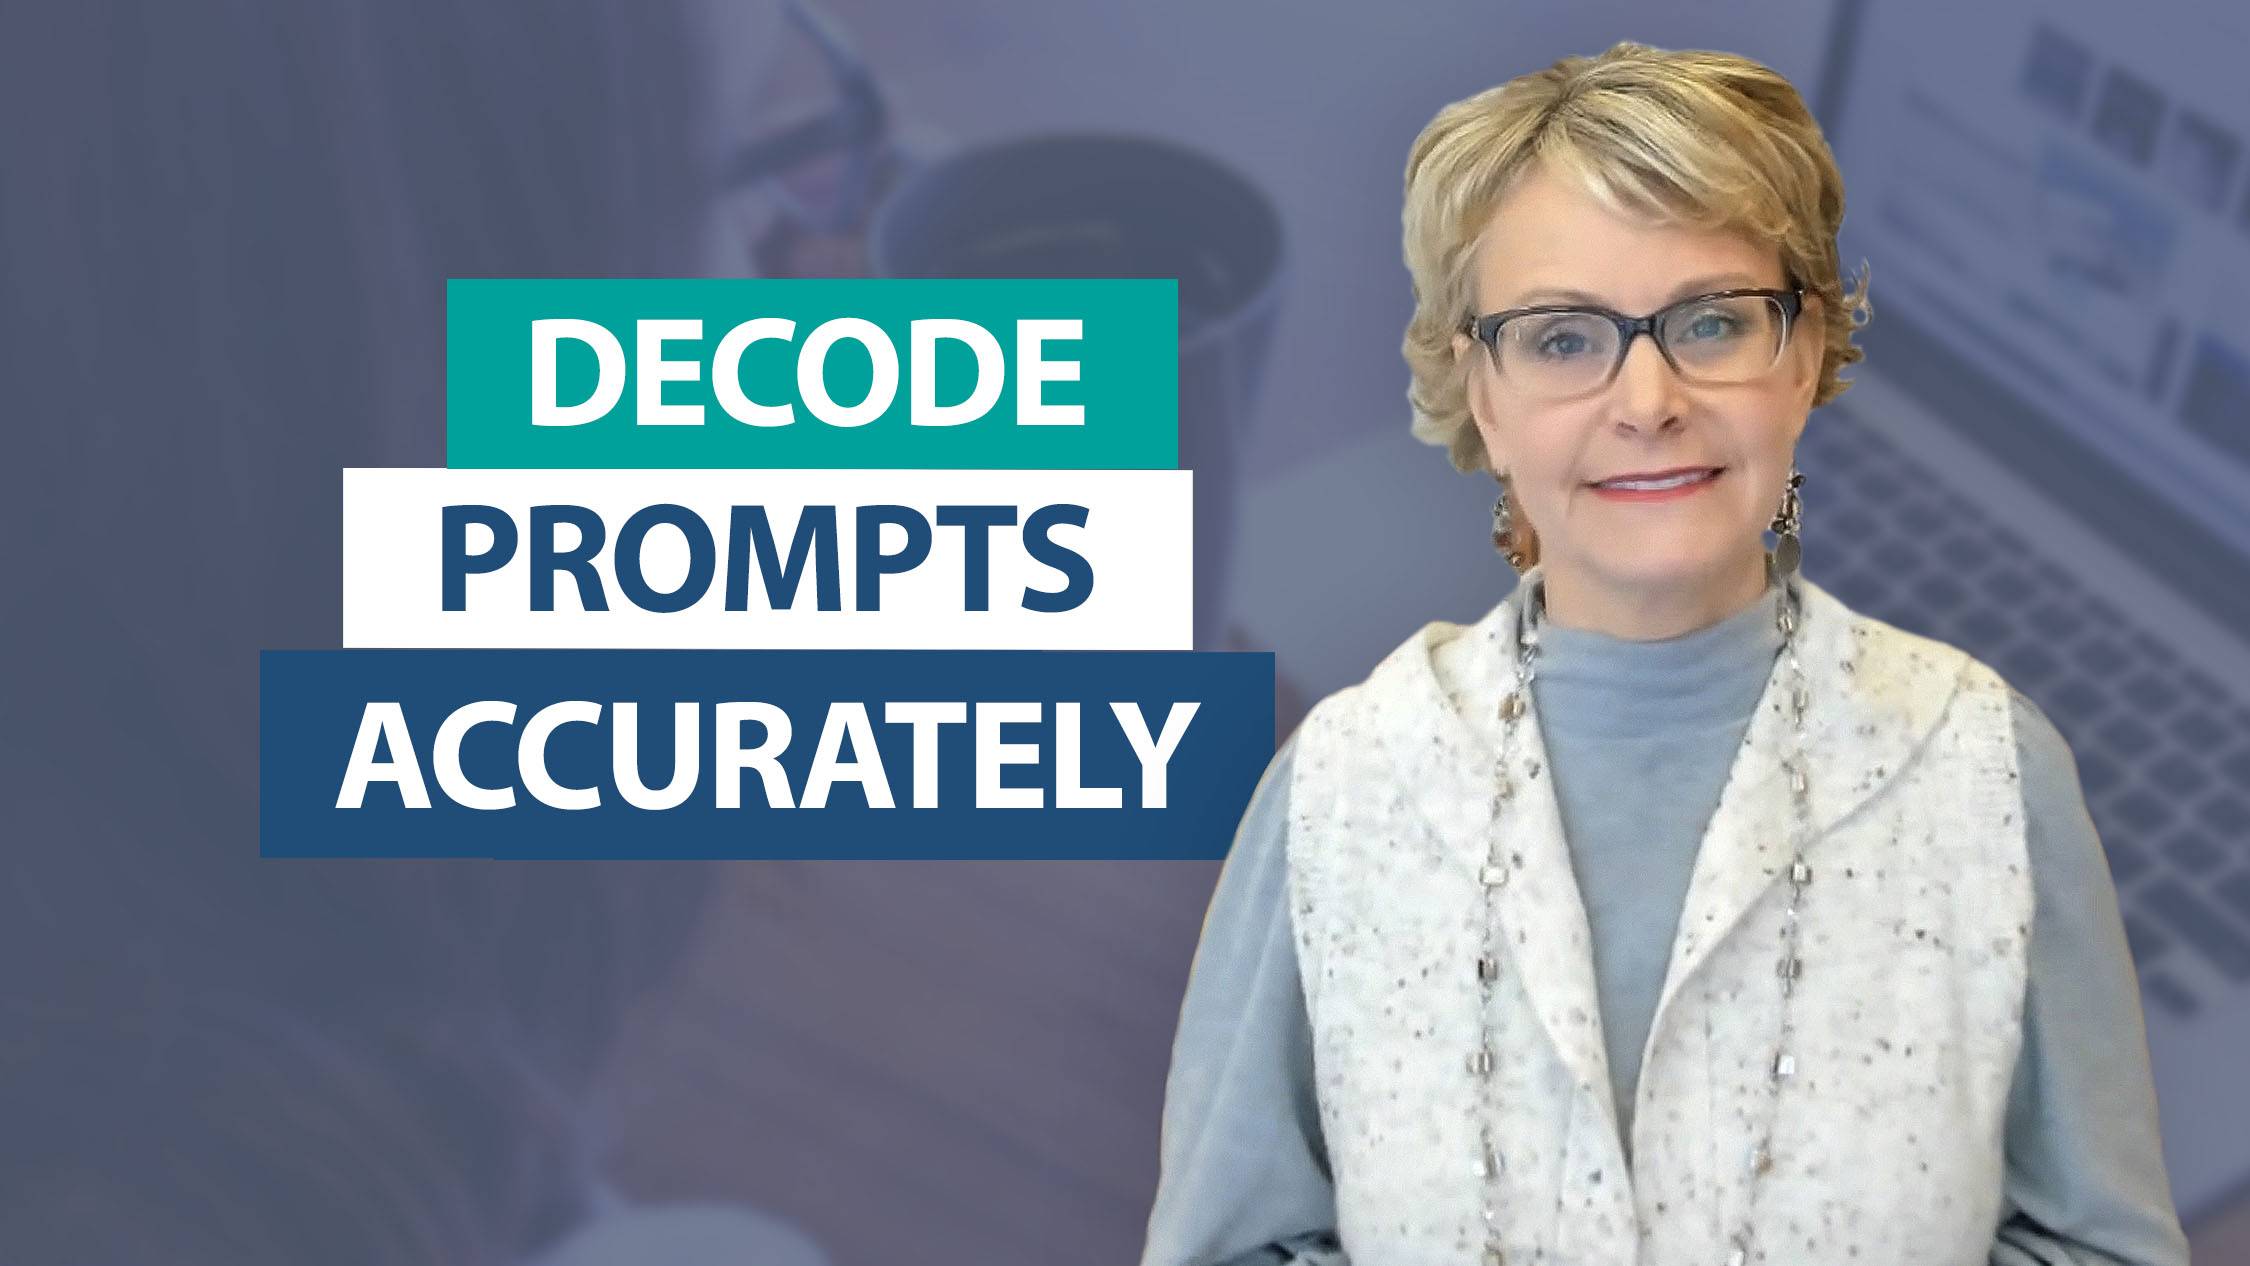 Decode a prompt in 3 steps